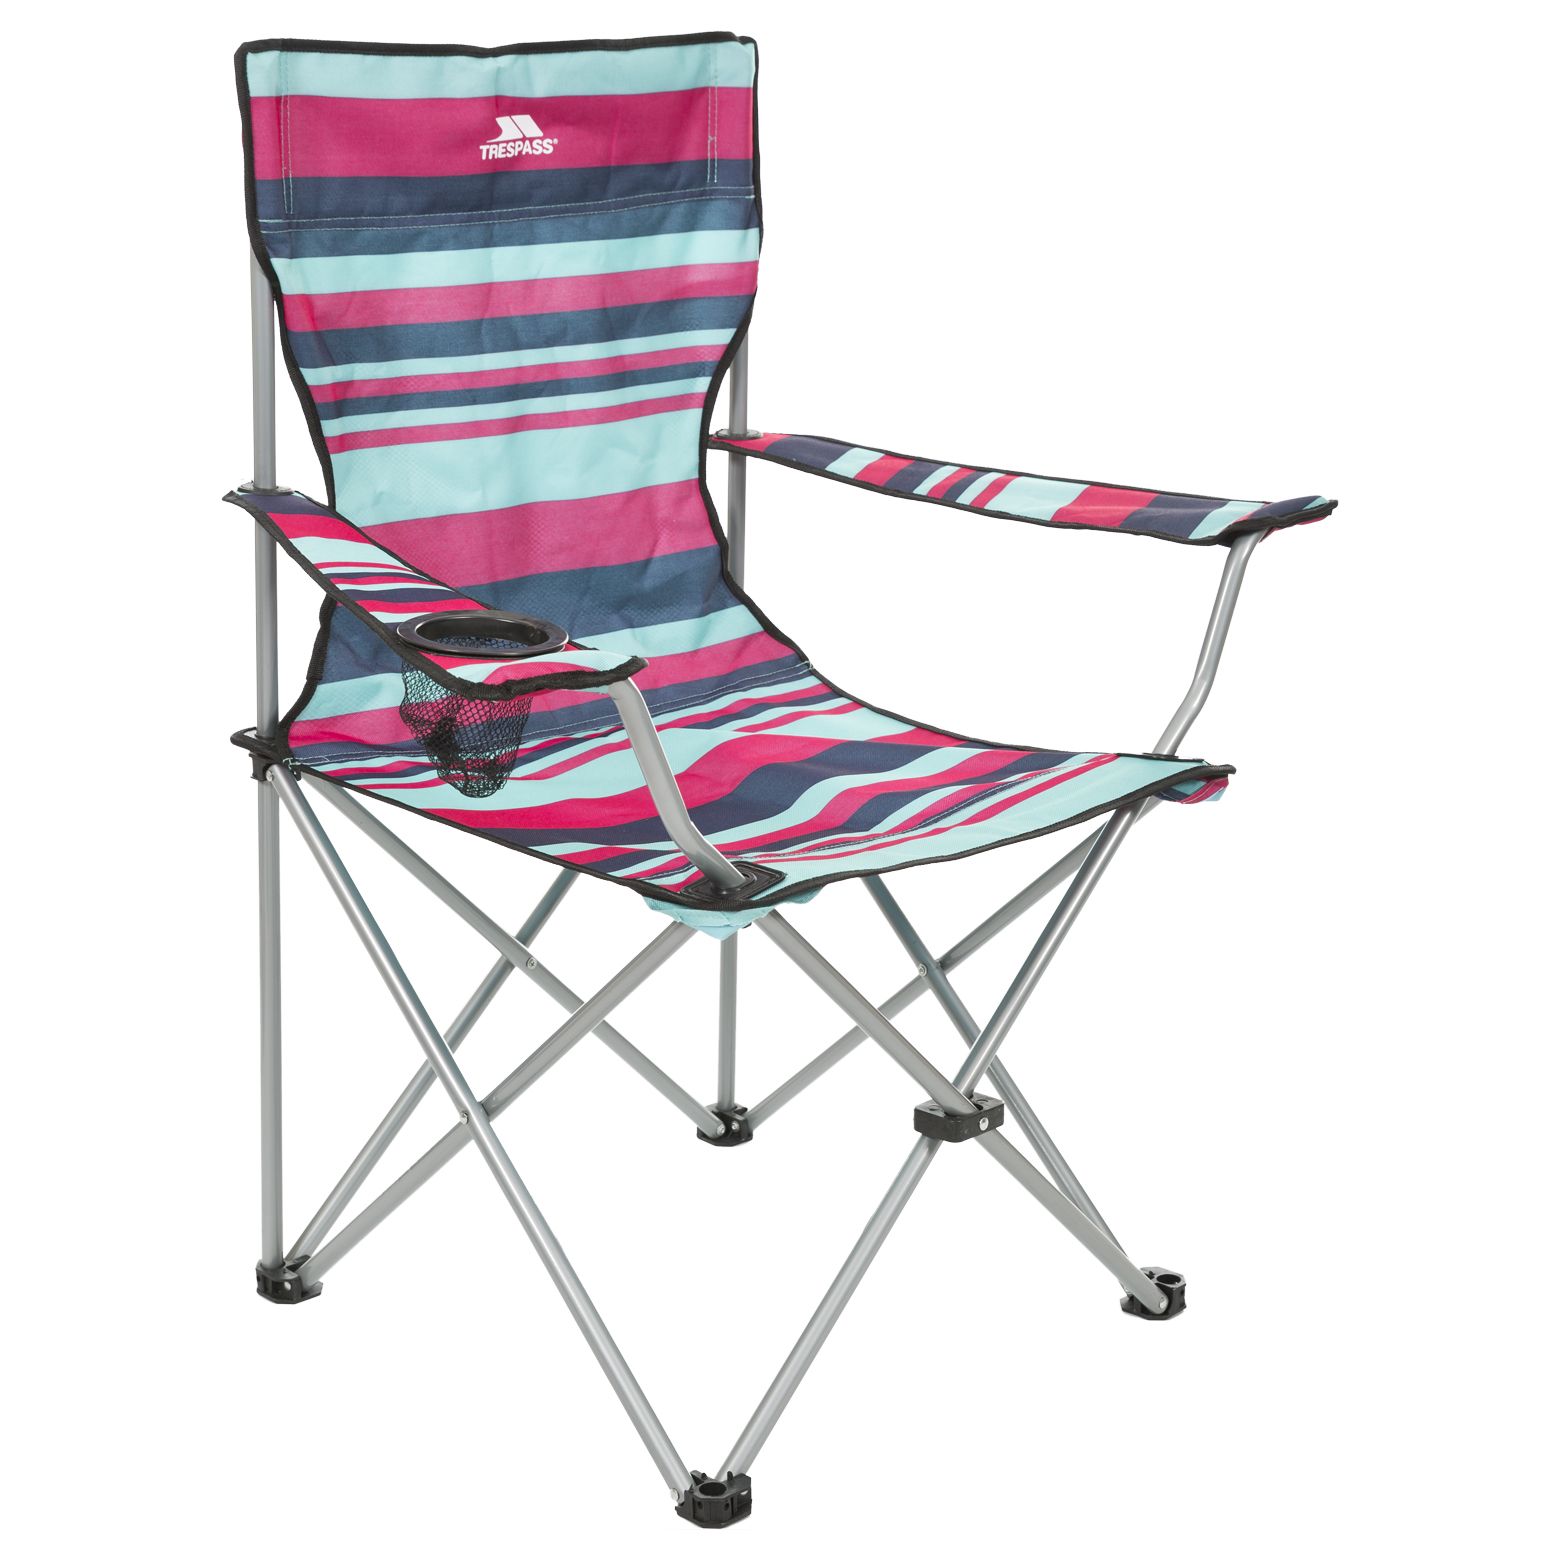 Trespass Folding Camping Chair With Drinks Holder Branson